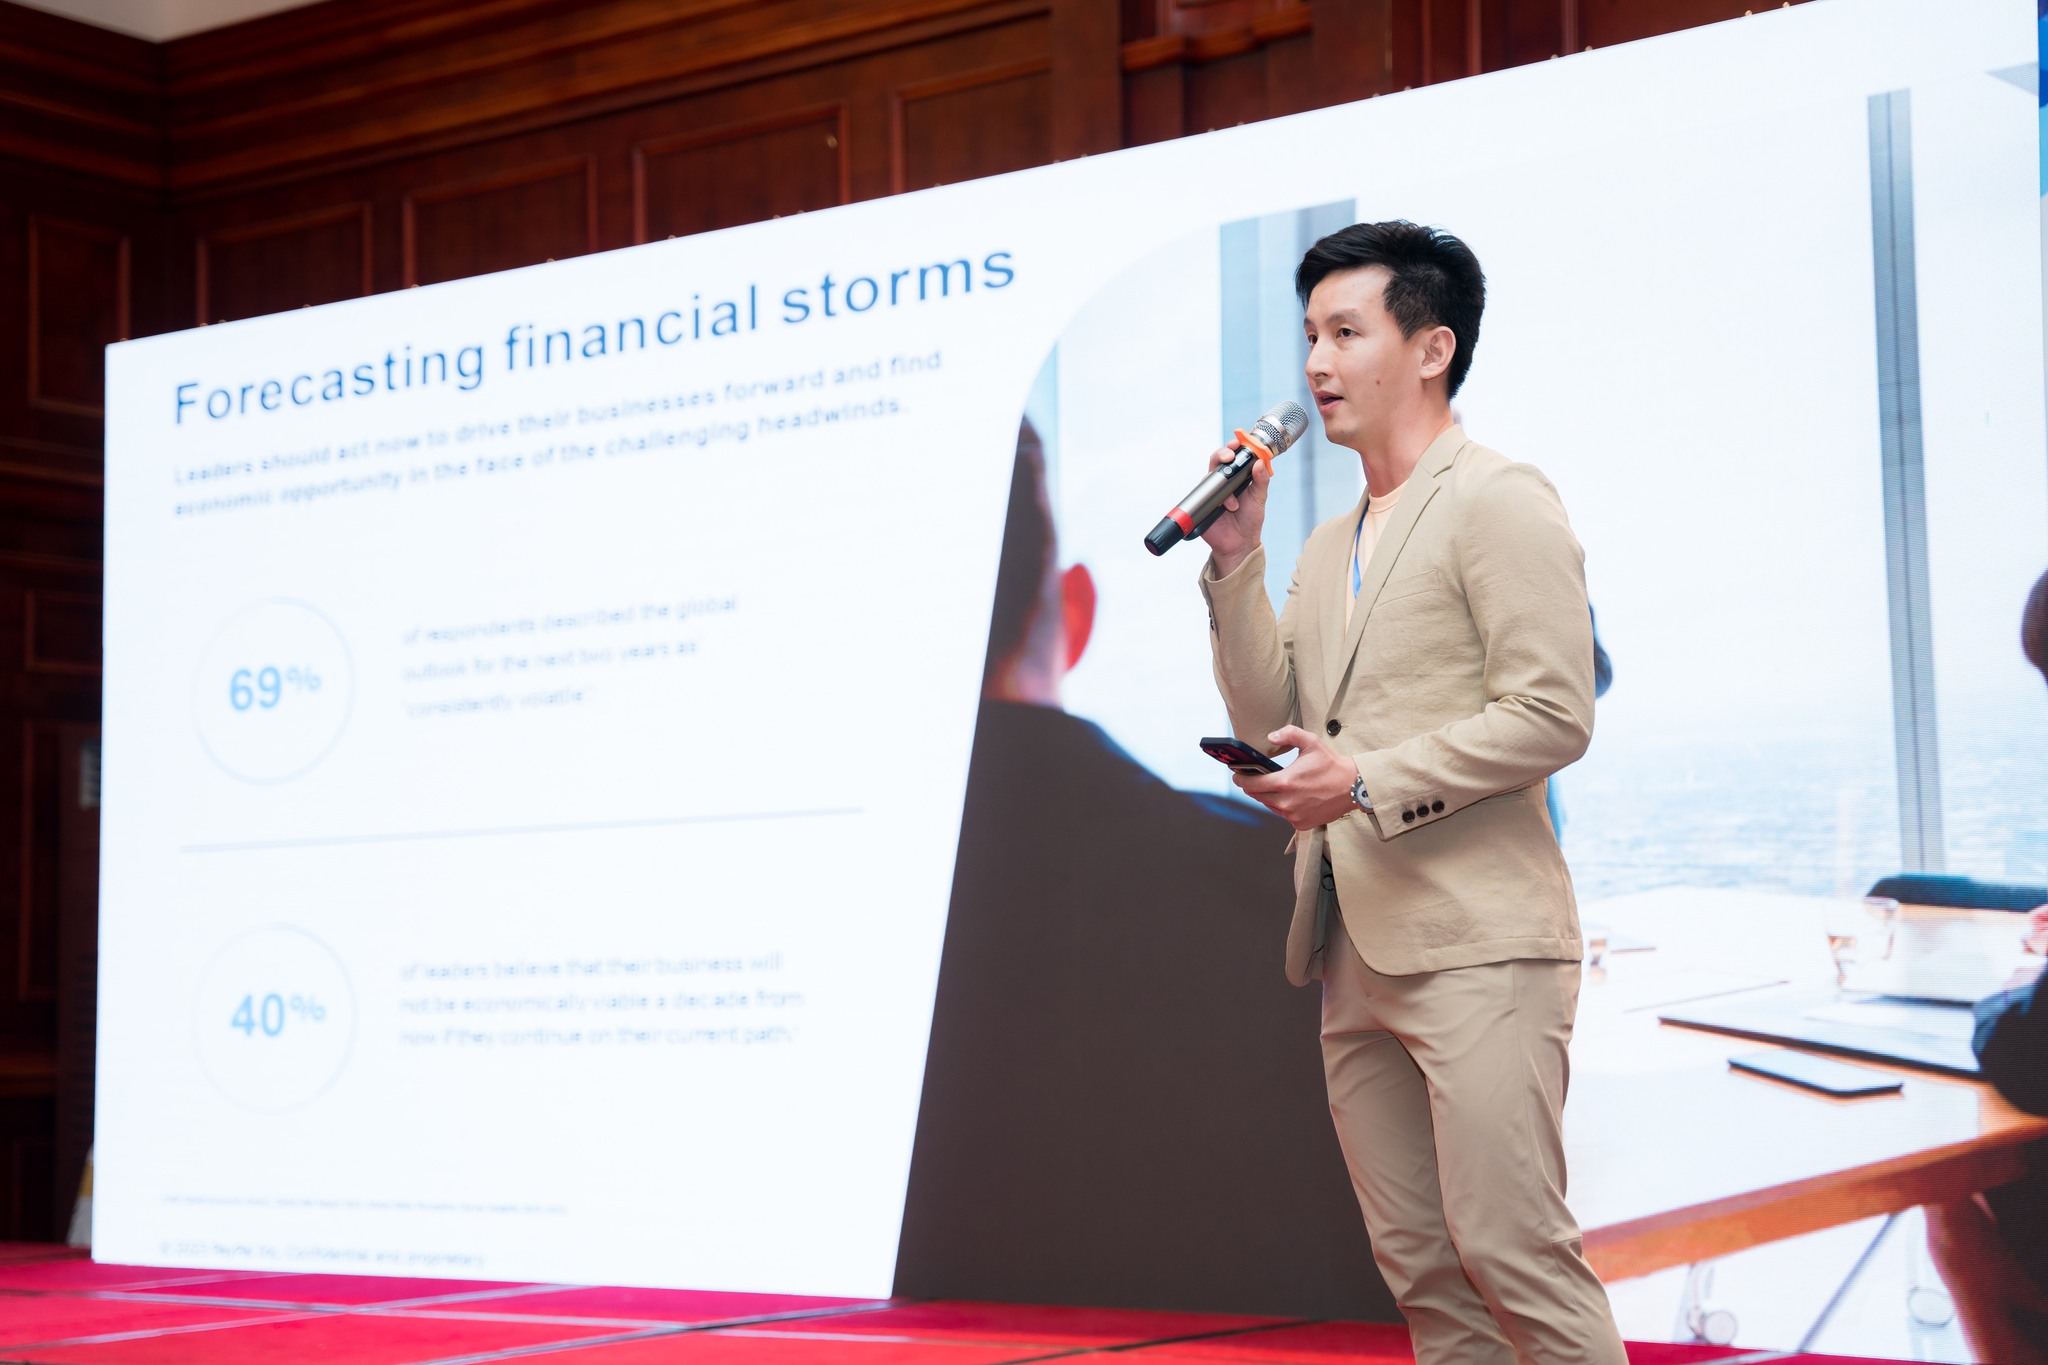 Sự kiện cổng thanh toán JNT x PayPal: A Future of Seamless Payments 2023